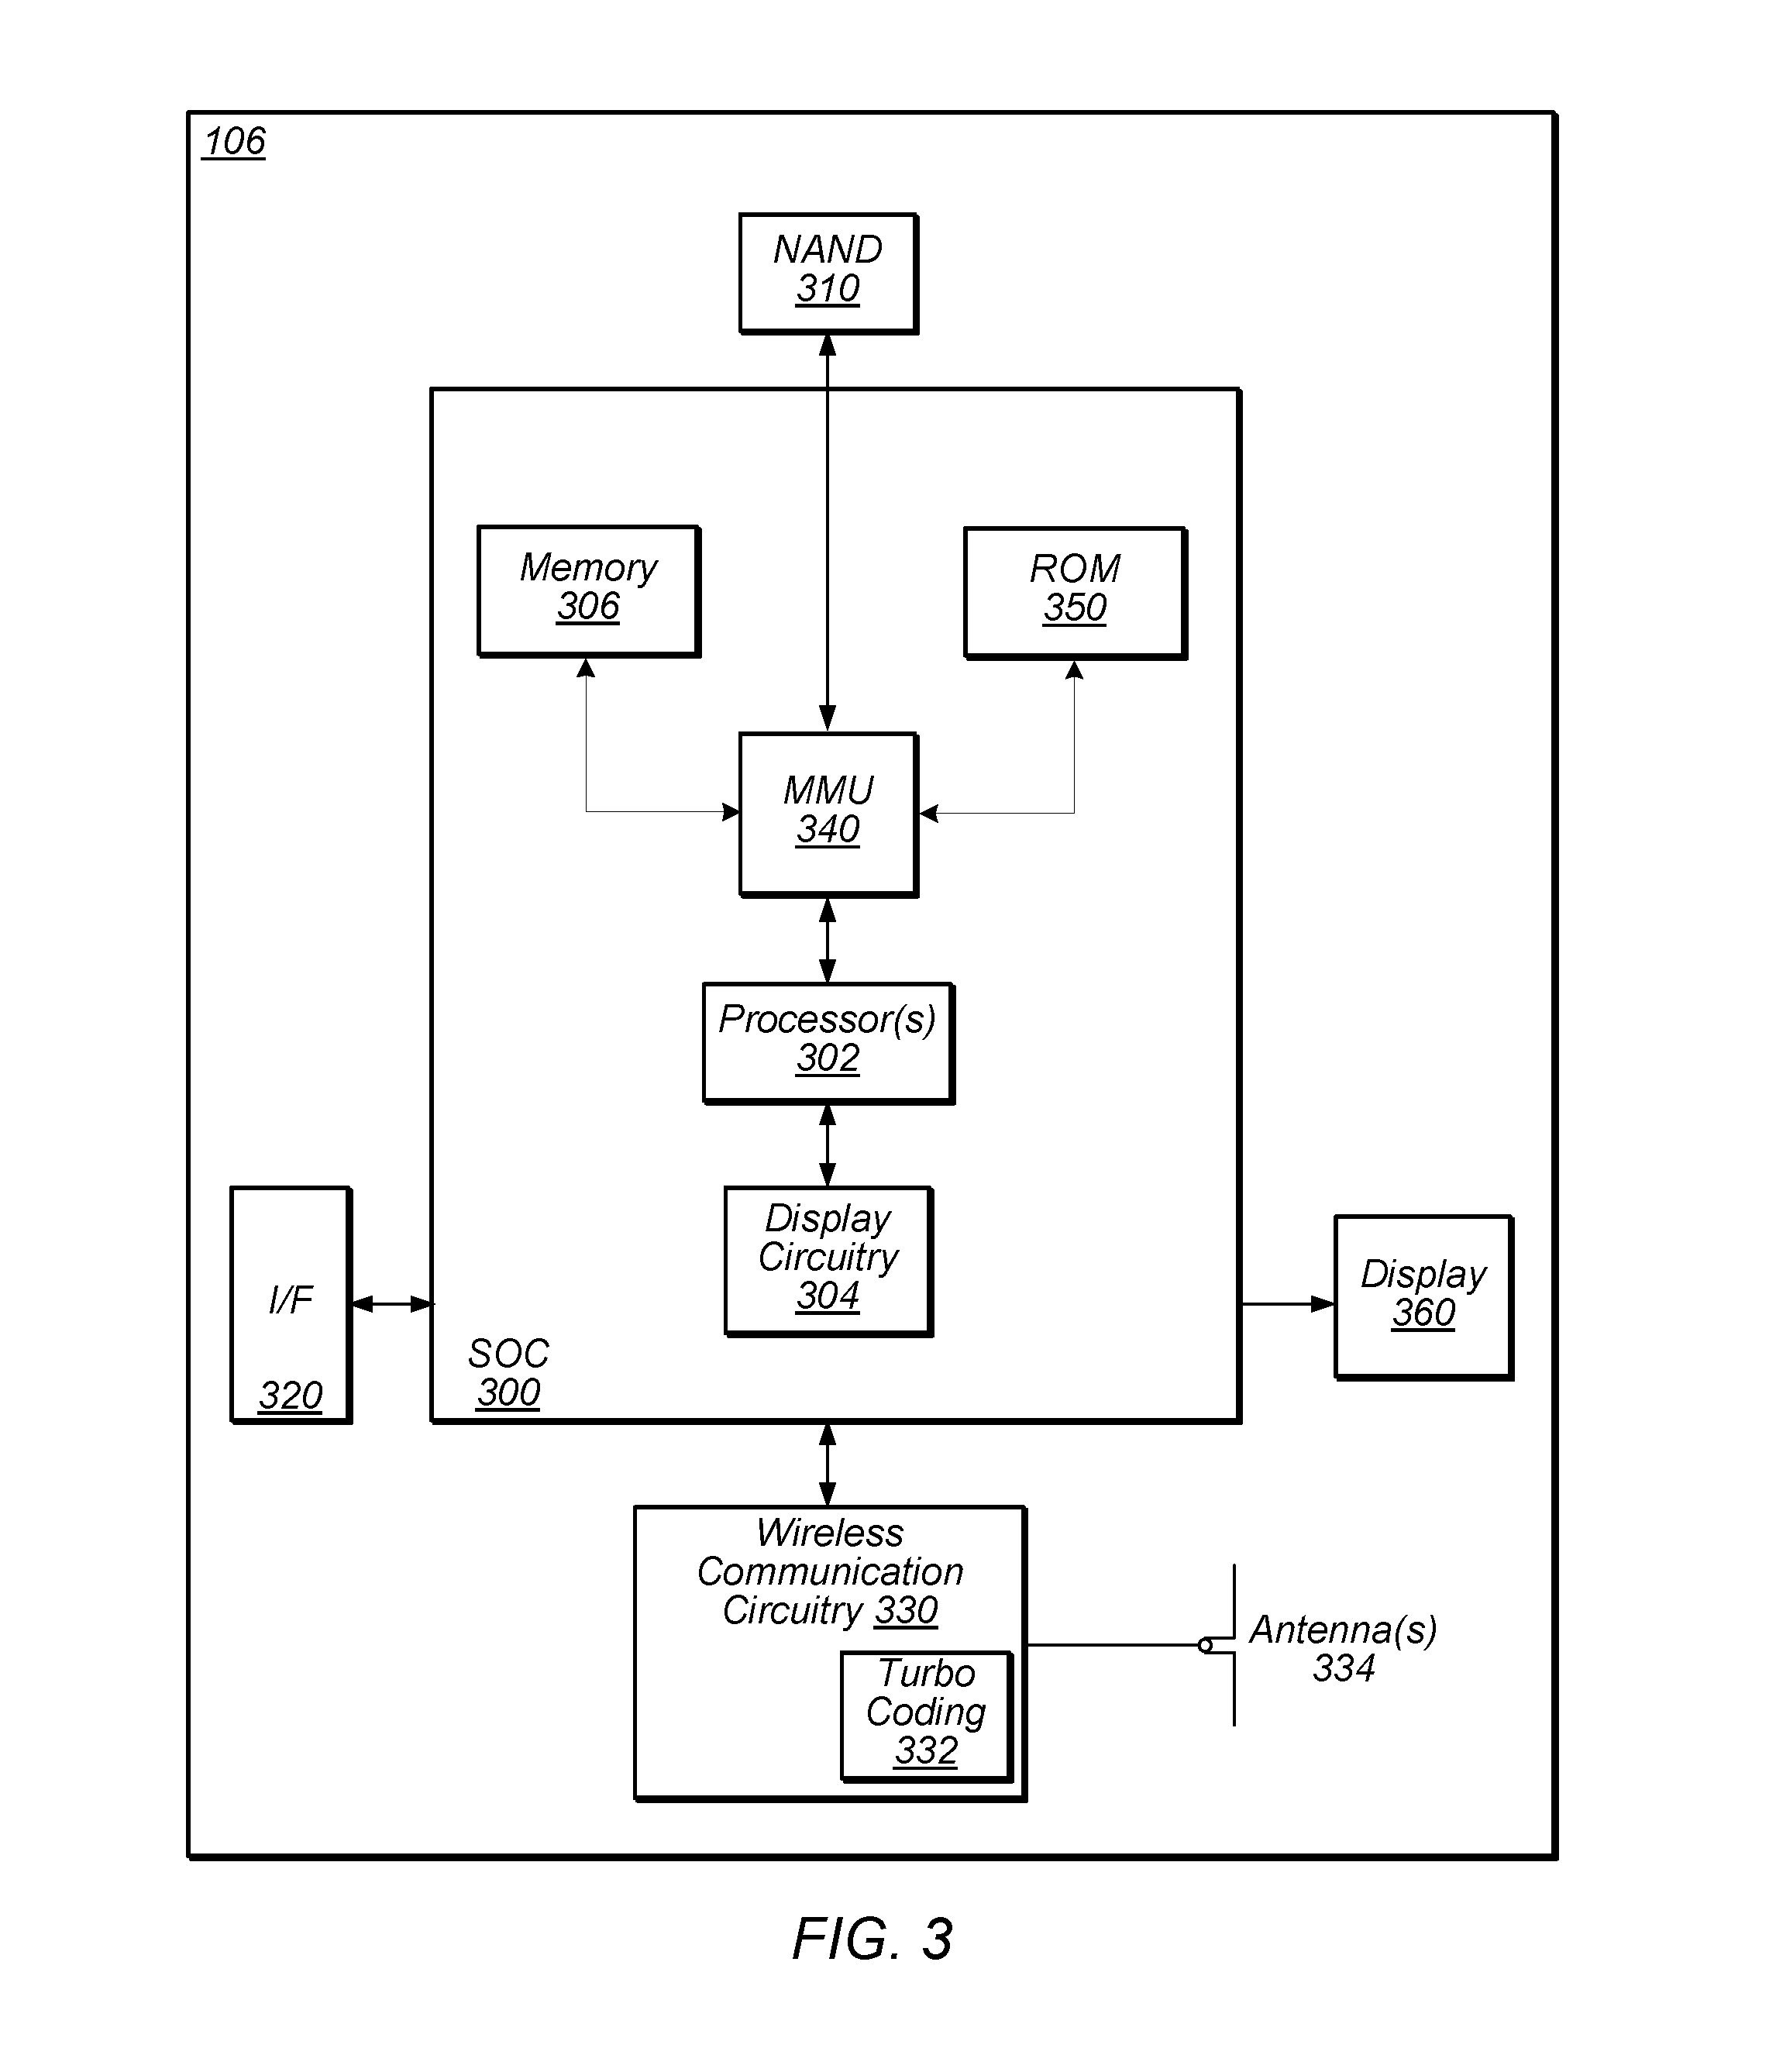 Stopping Criteria for Turbo Decoder